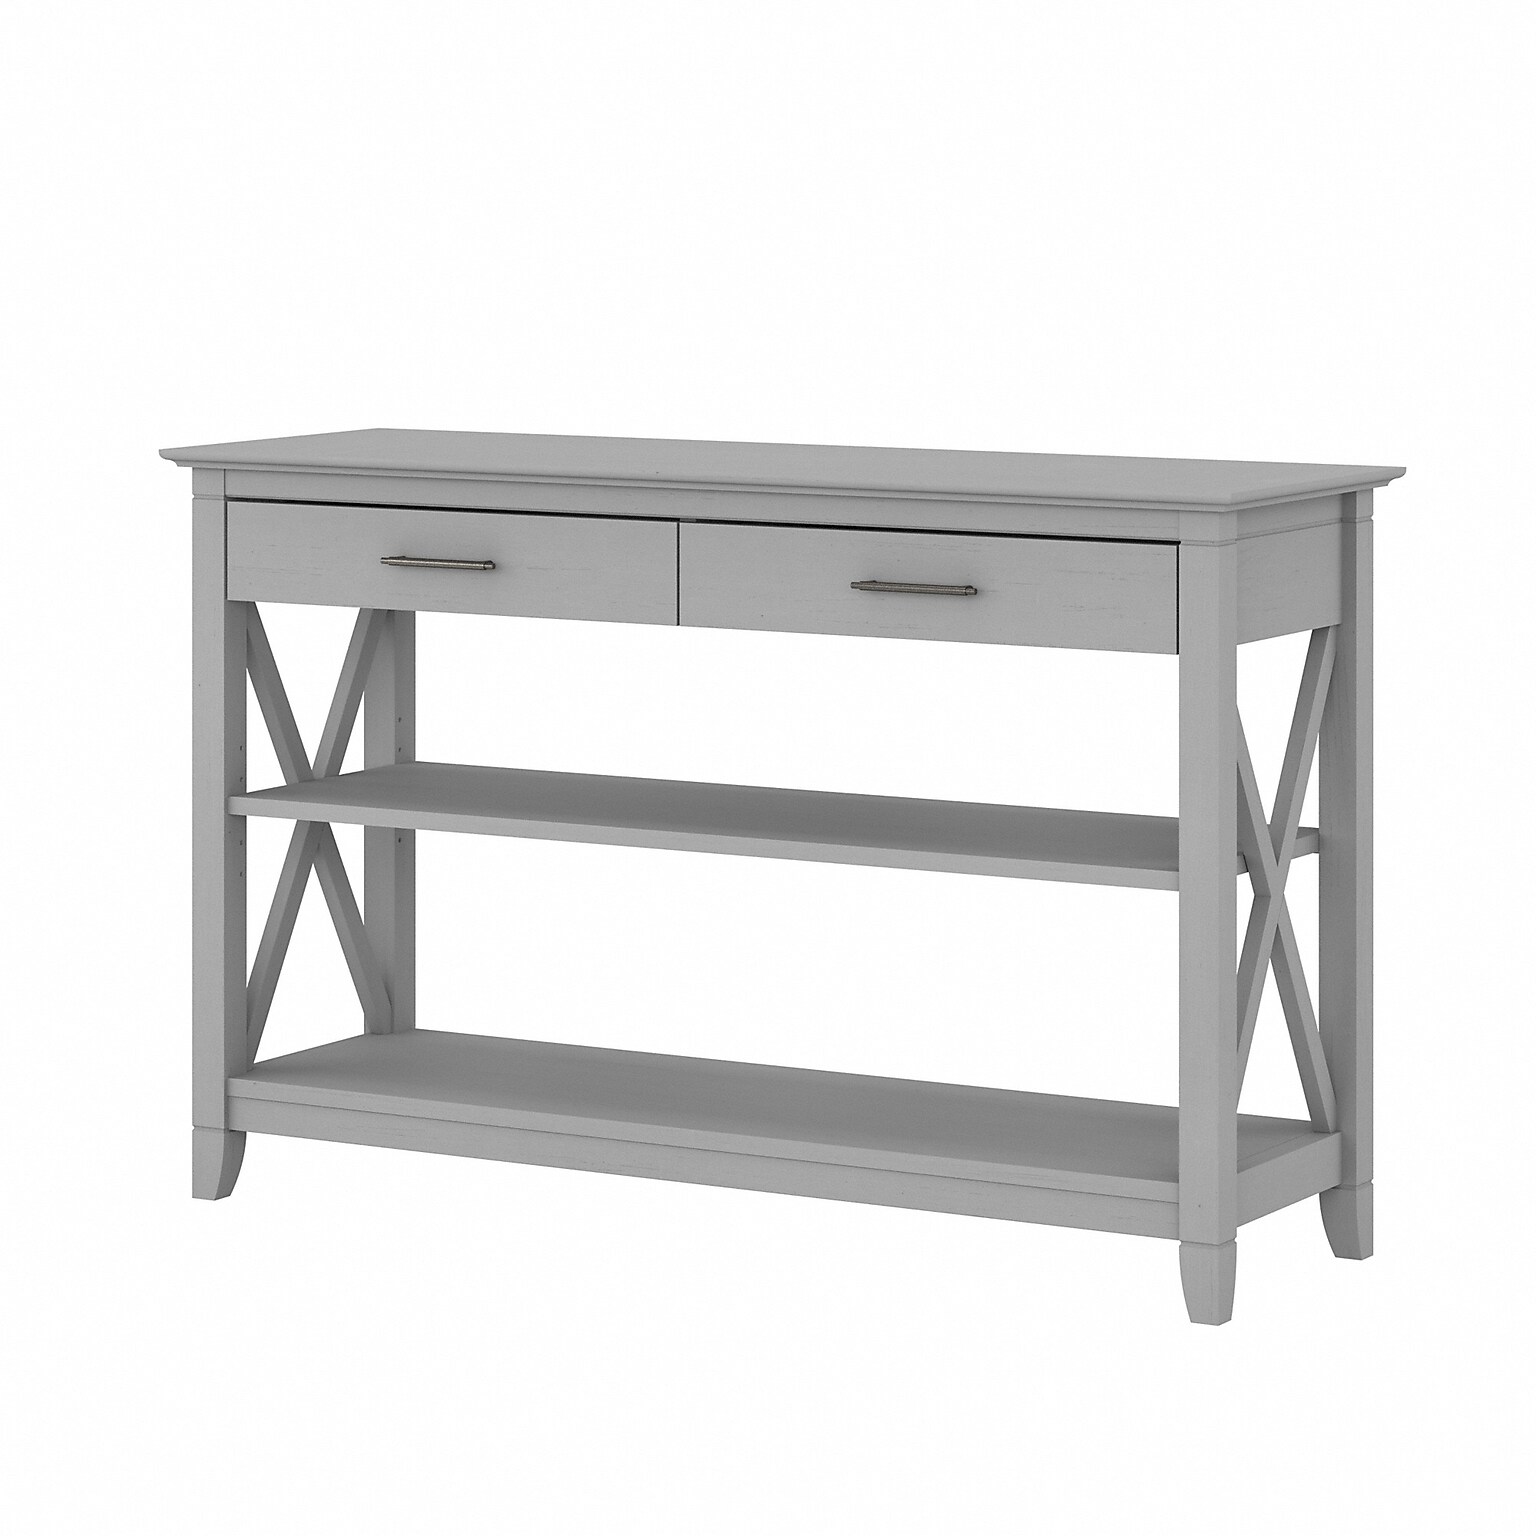 Bush Furniture Key West 47 x 16 Console Table with Drawers and Shelves, Cape Cod Gray (KWT248CG-03)